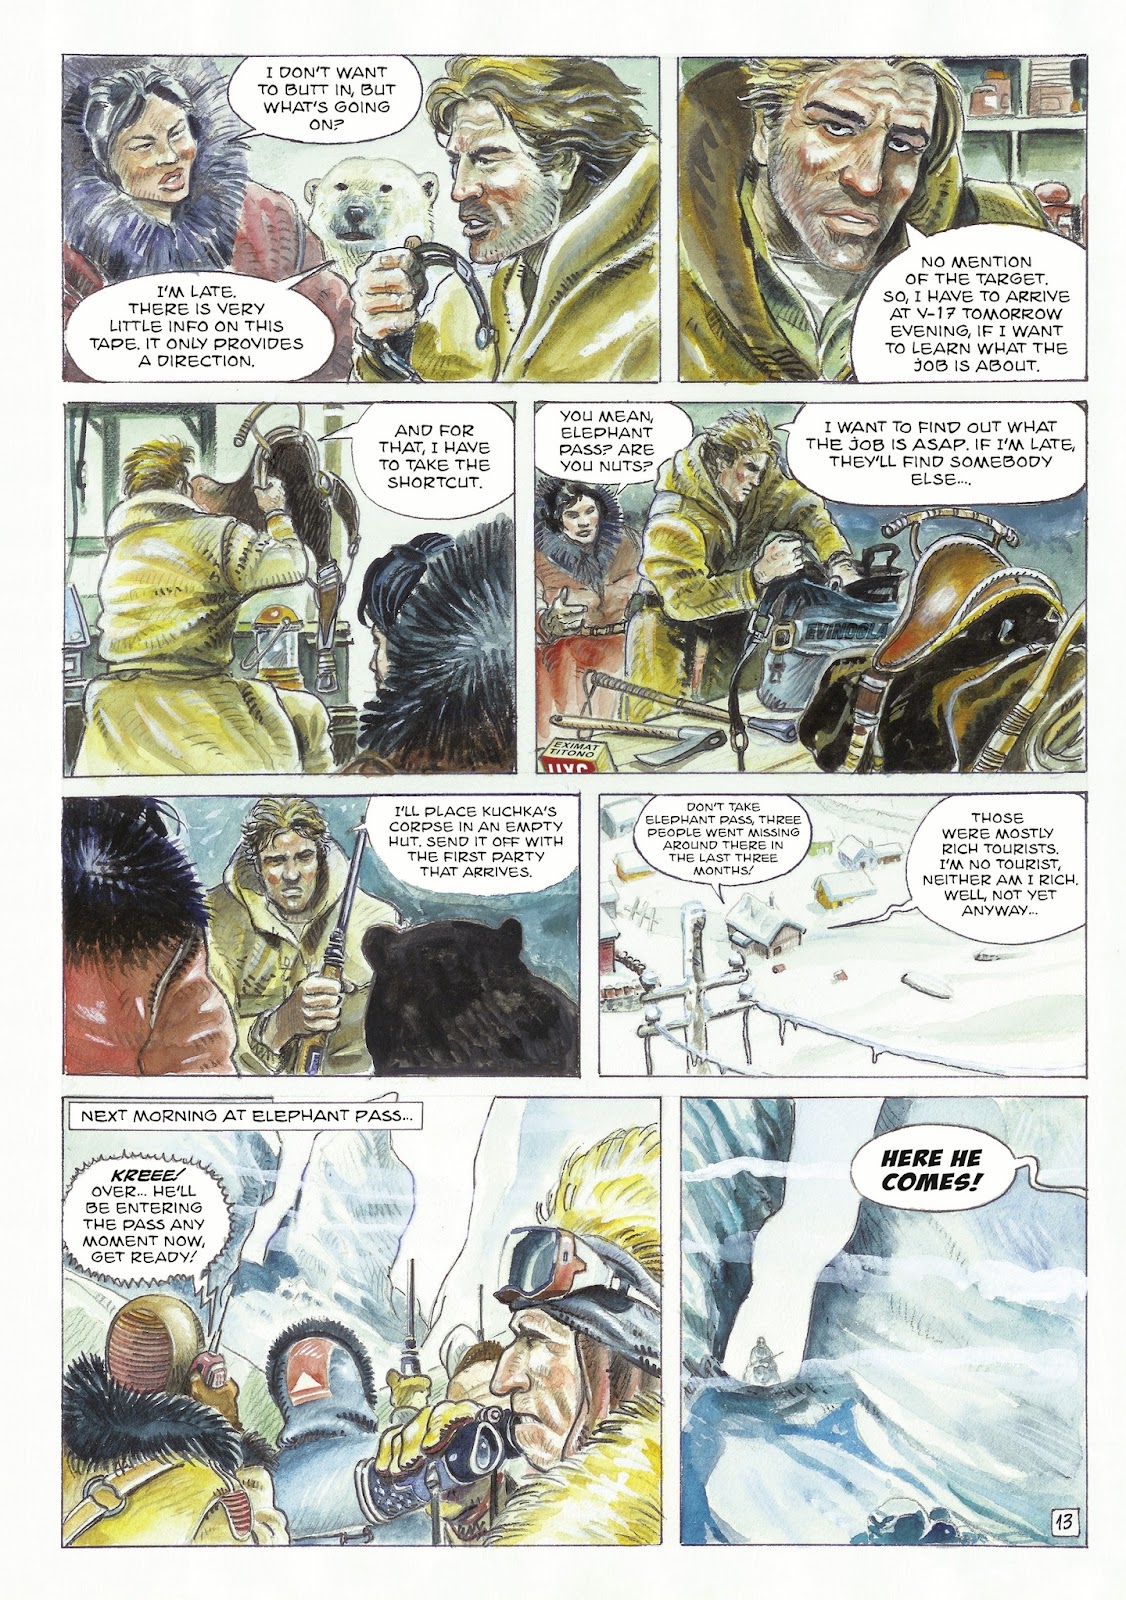 The Man With the Bear issue 1 - Page 15